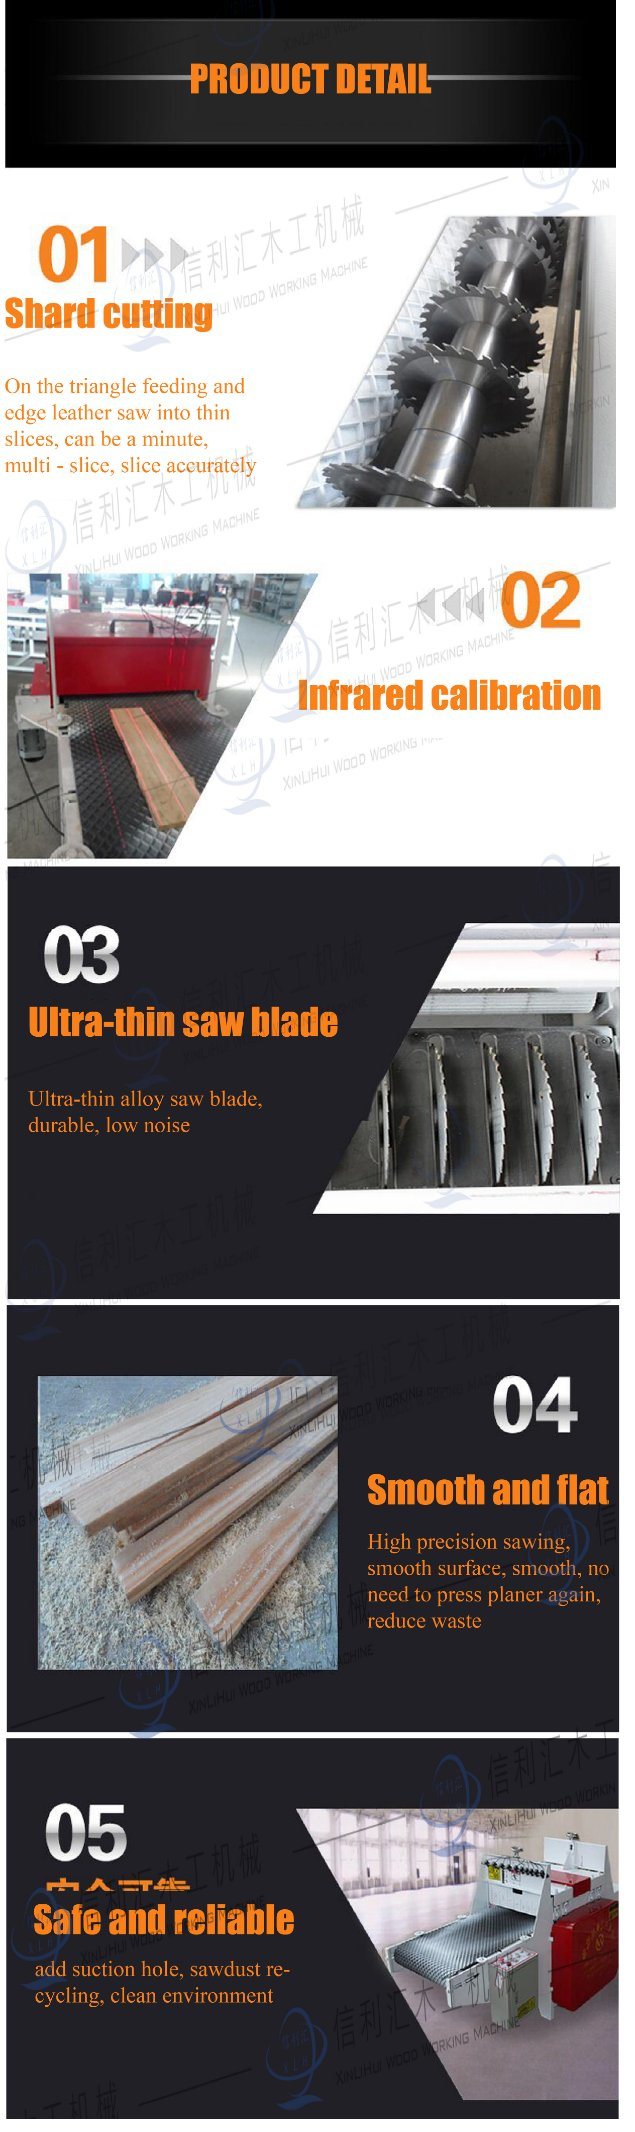 Easy Operate Mj Multiple Blade Rip Saw Buzzsaw for Planks Cutting Machine to Cut Solid Wood. Wood Machine